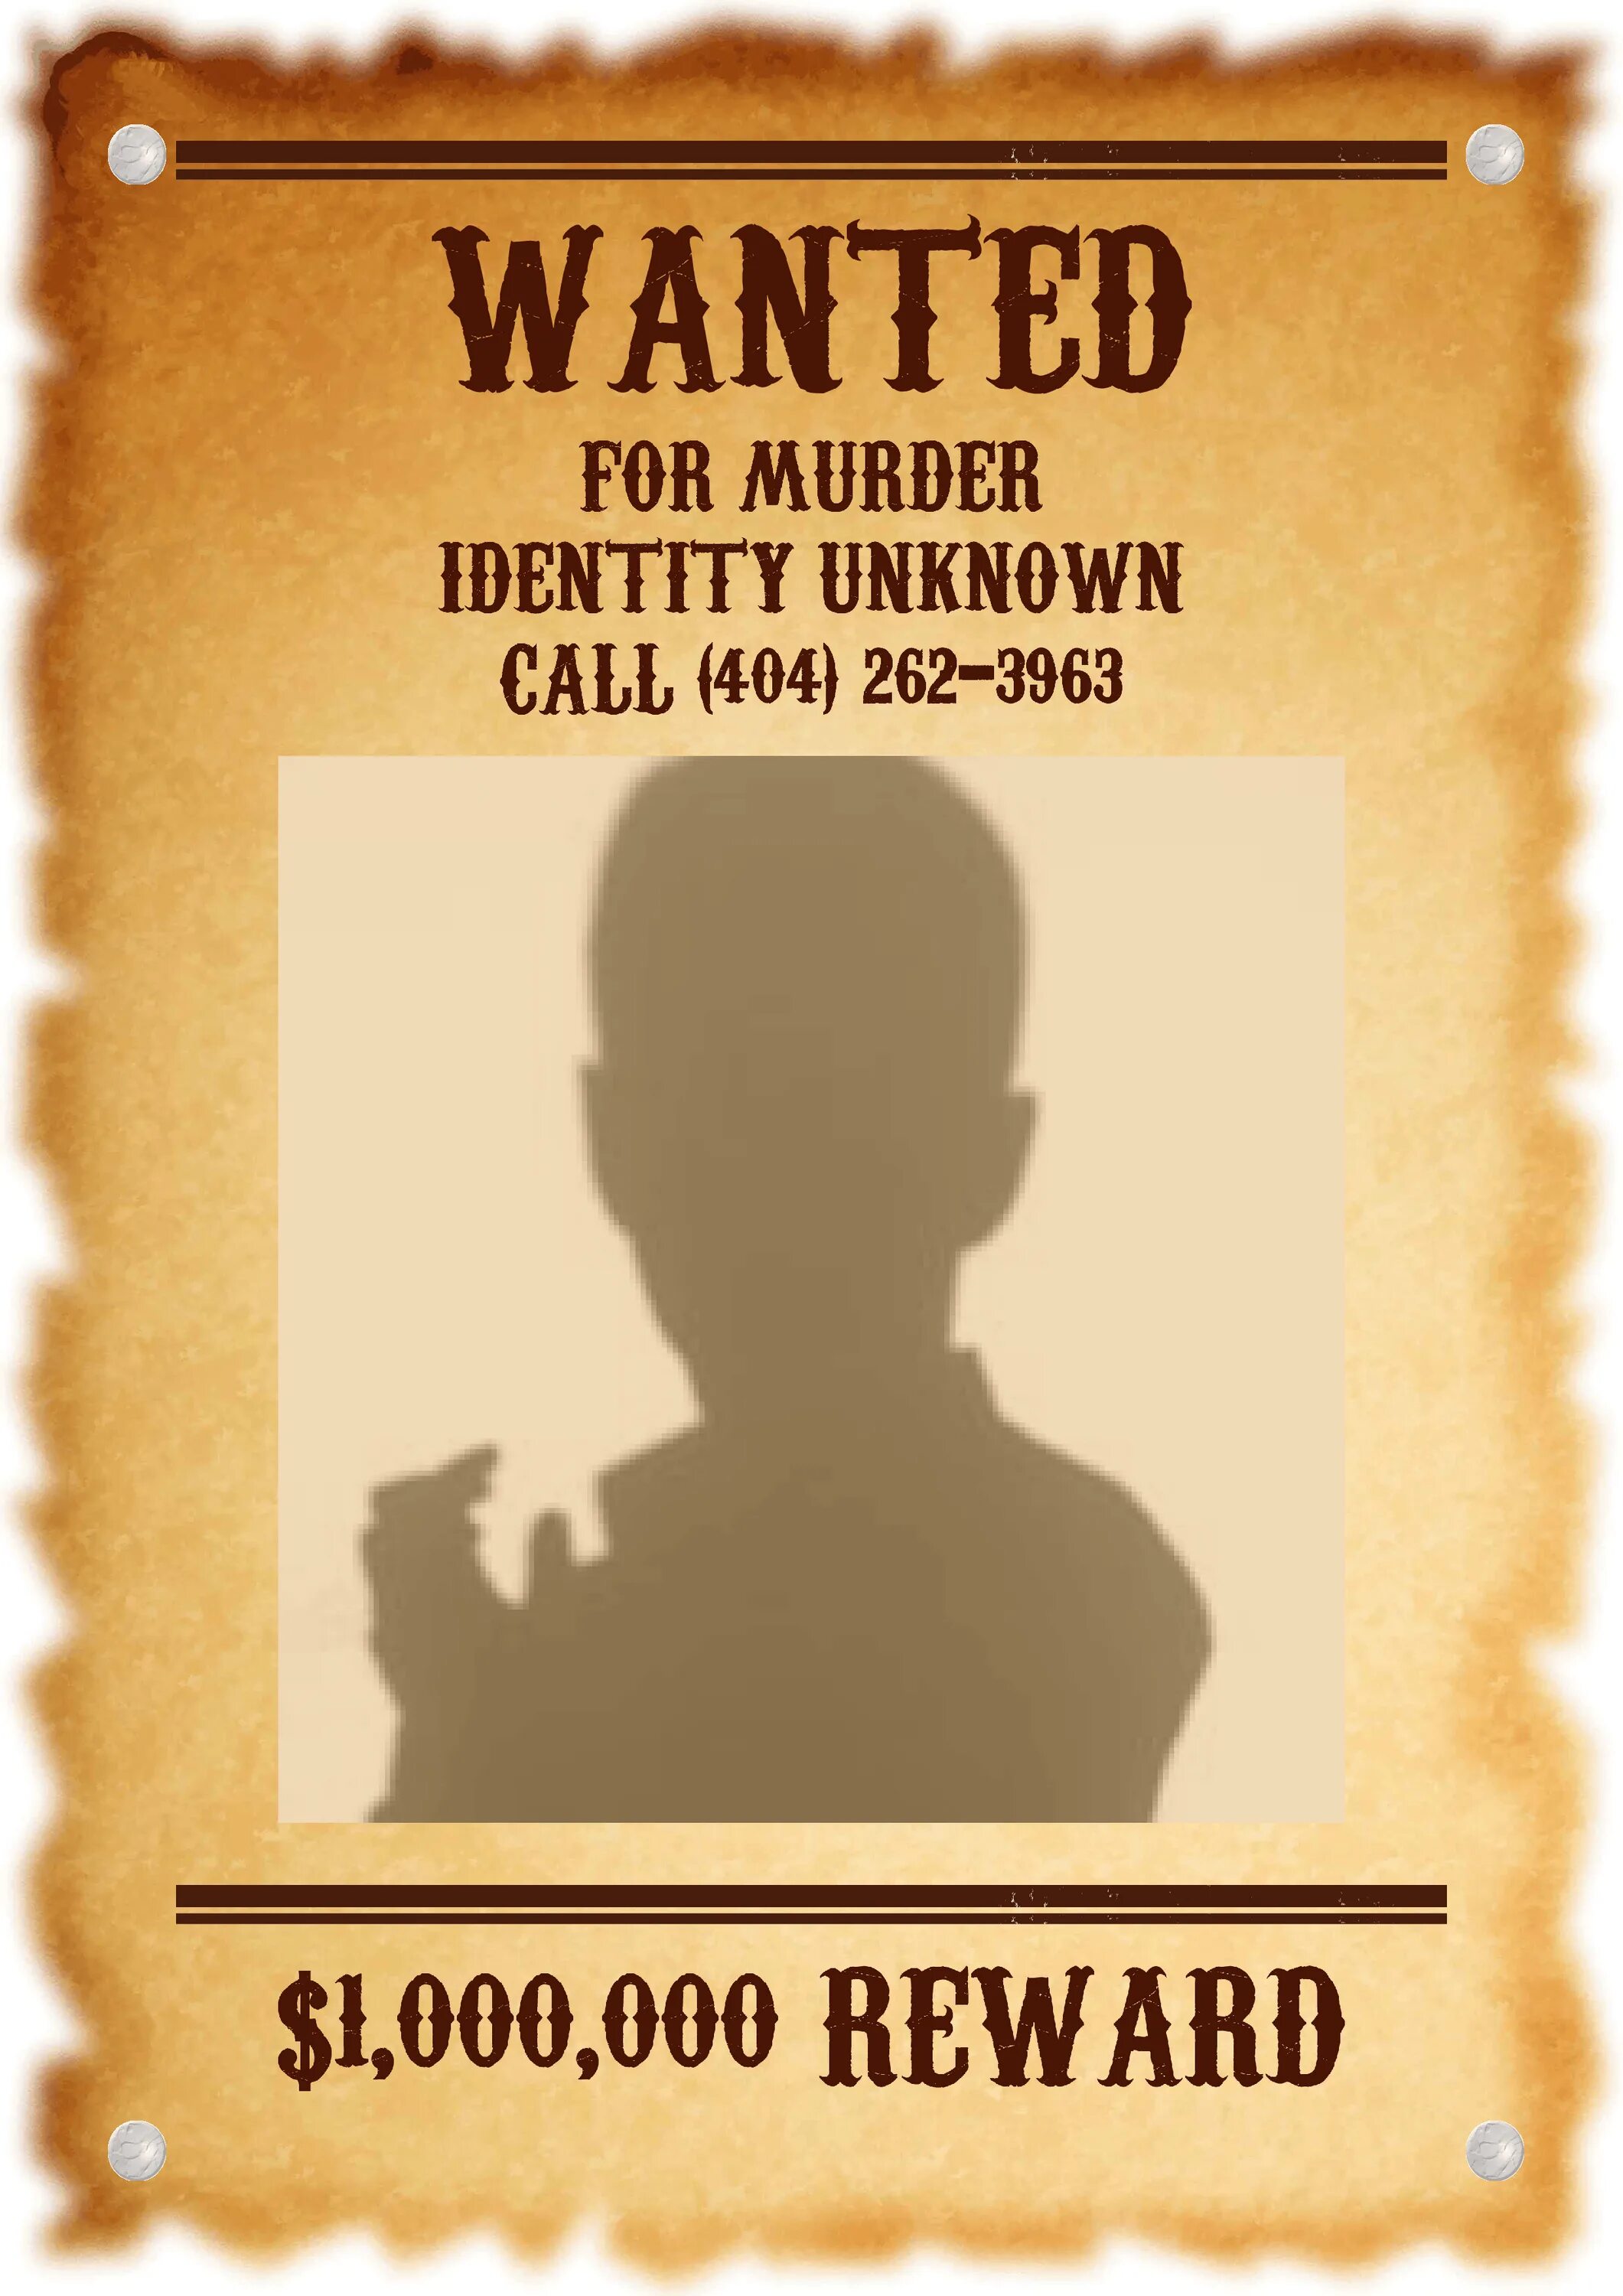 Wanted. Wanted Murder. Wanted картинка. Wanted for Murder плакат. Wants vk